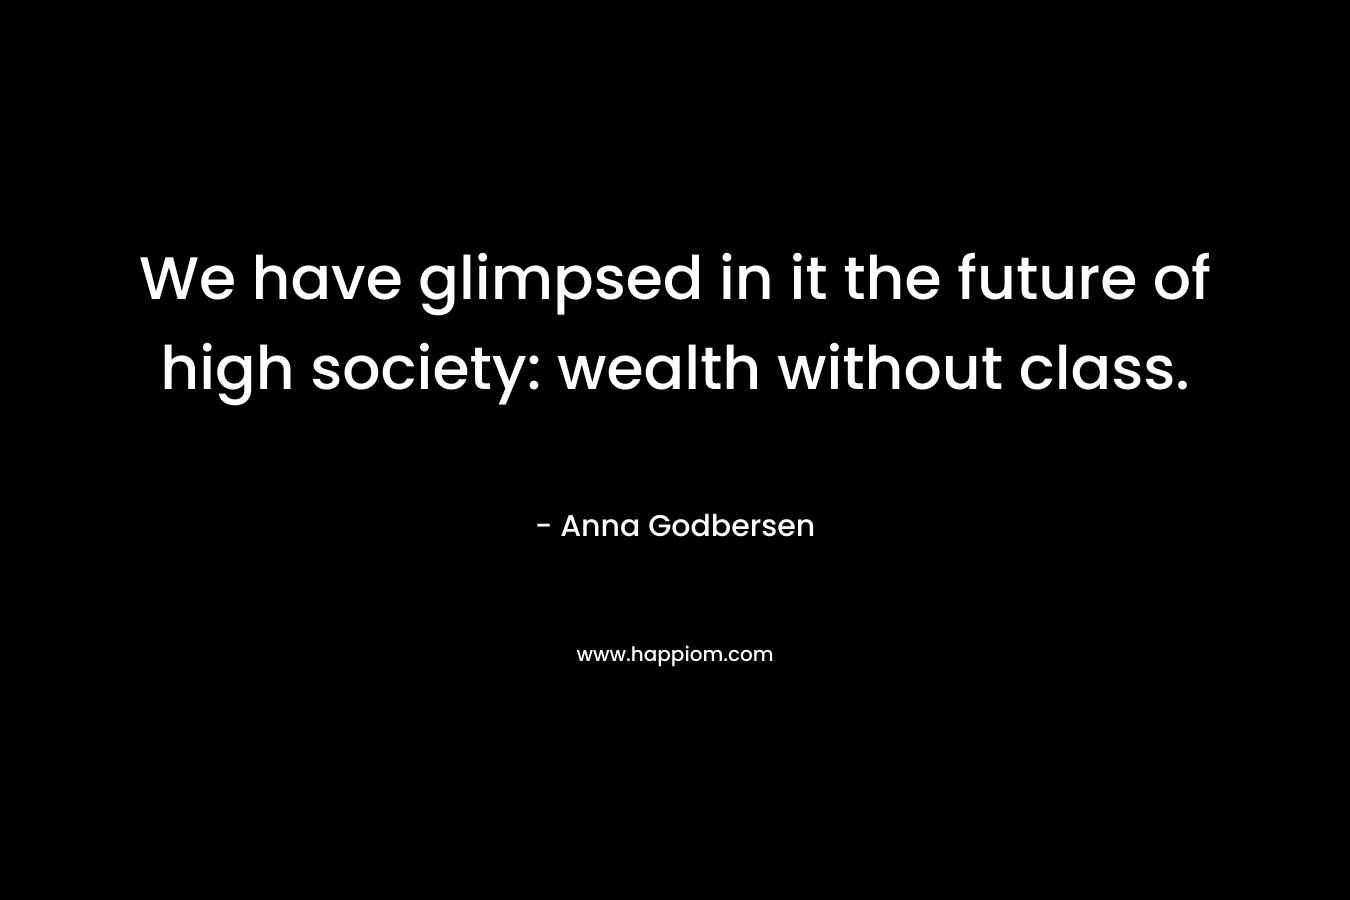 We have glimpsed in it the future of high society: wealth without class.